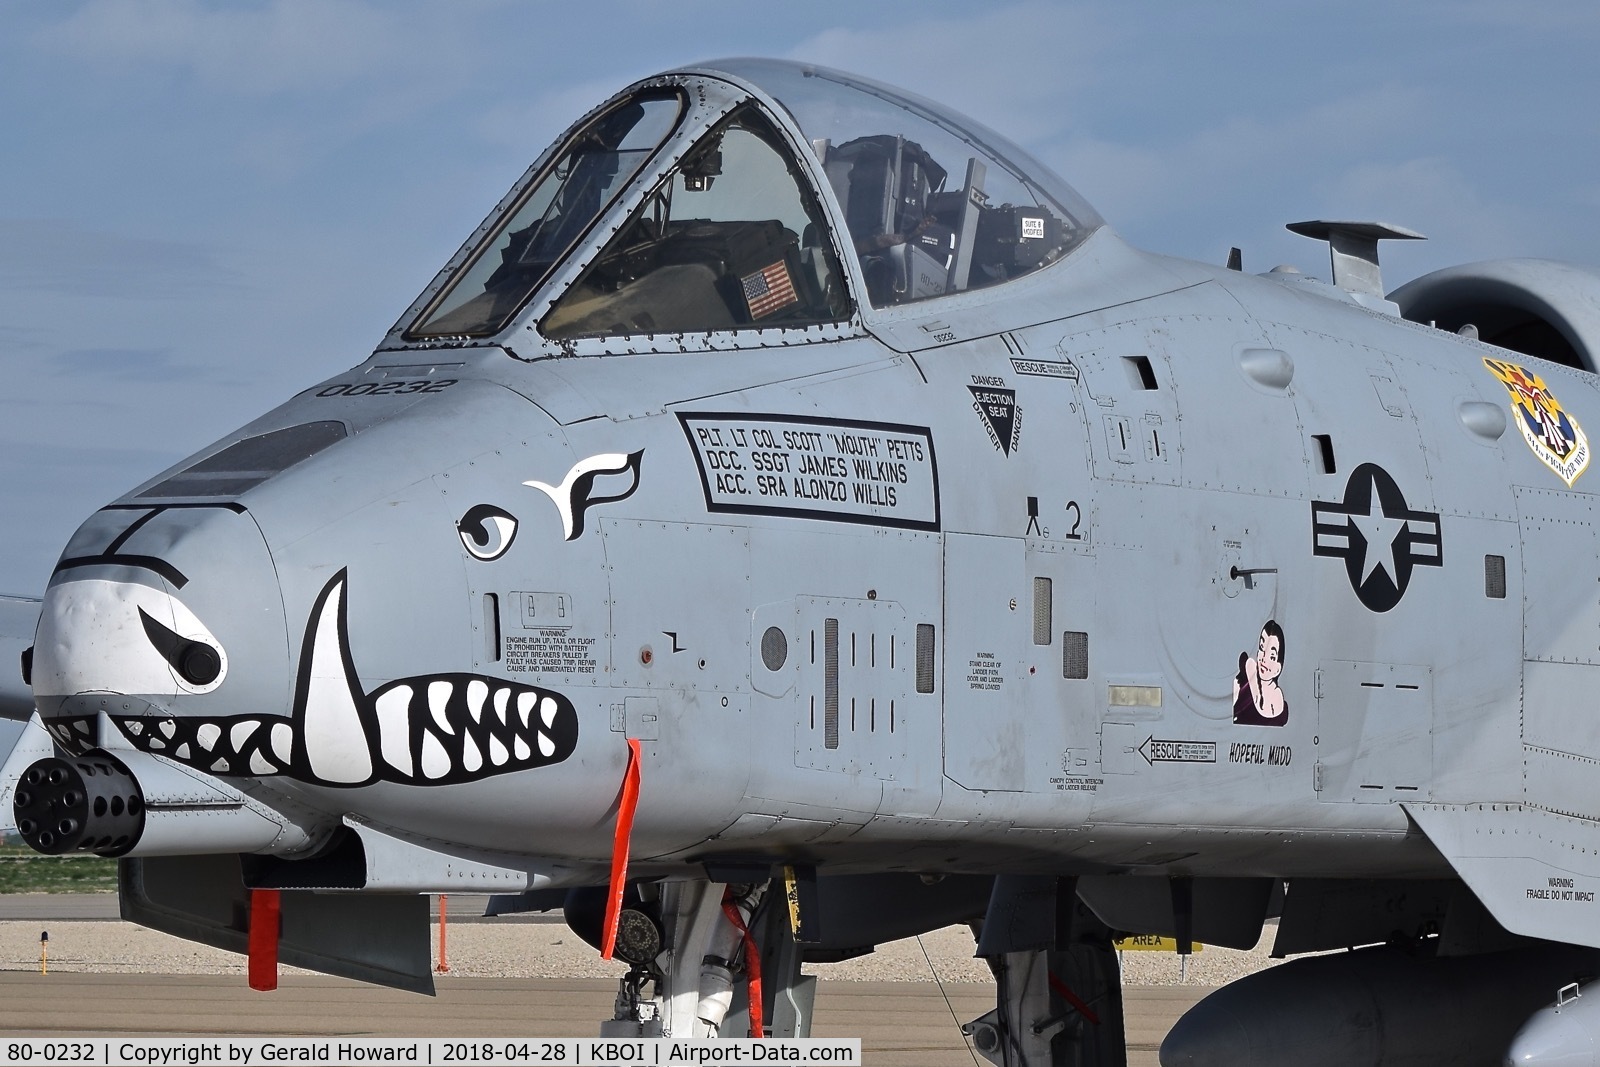 80-0232, 1980 Fairchild Republic A-10C Thunderbolt II C/N A10-0582, 47th Fighter Sq.“Dogpatchers”, 944th Fighter Wing, Davis-Monthan AFB, AZ.